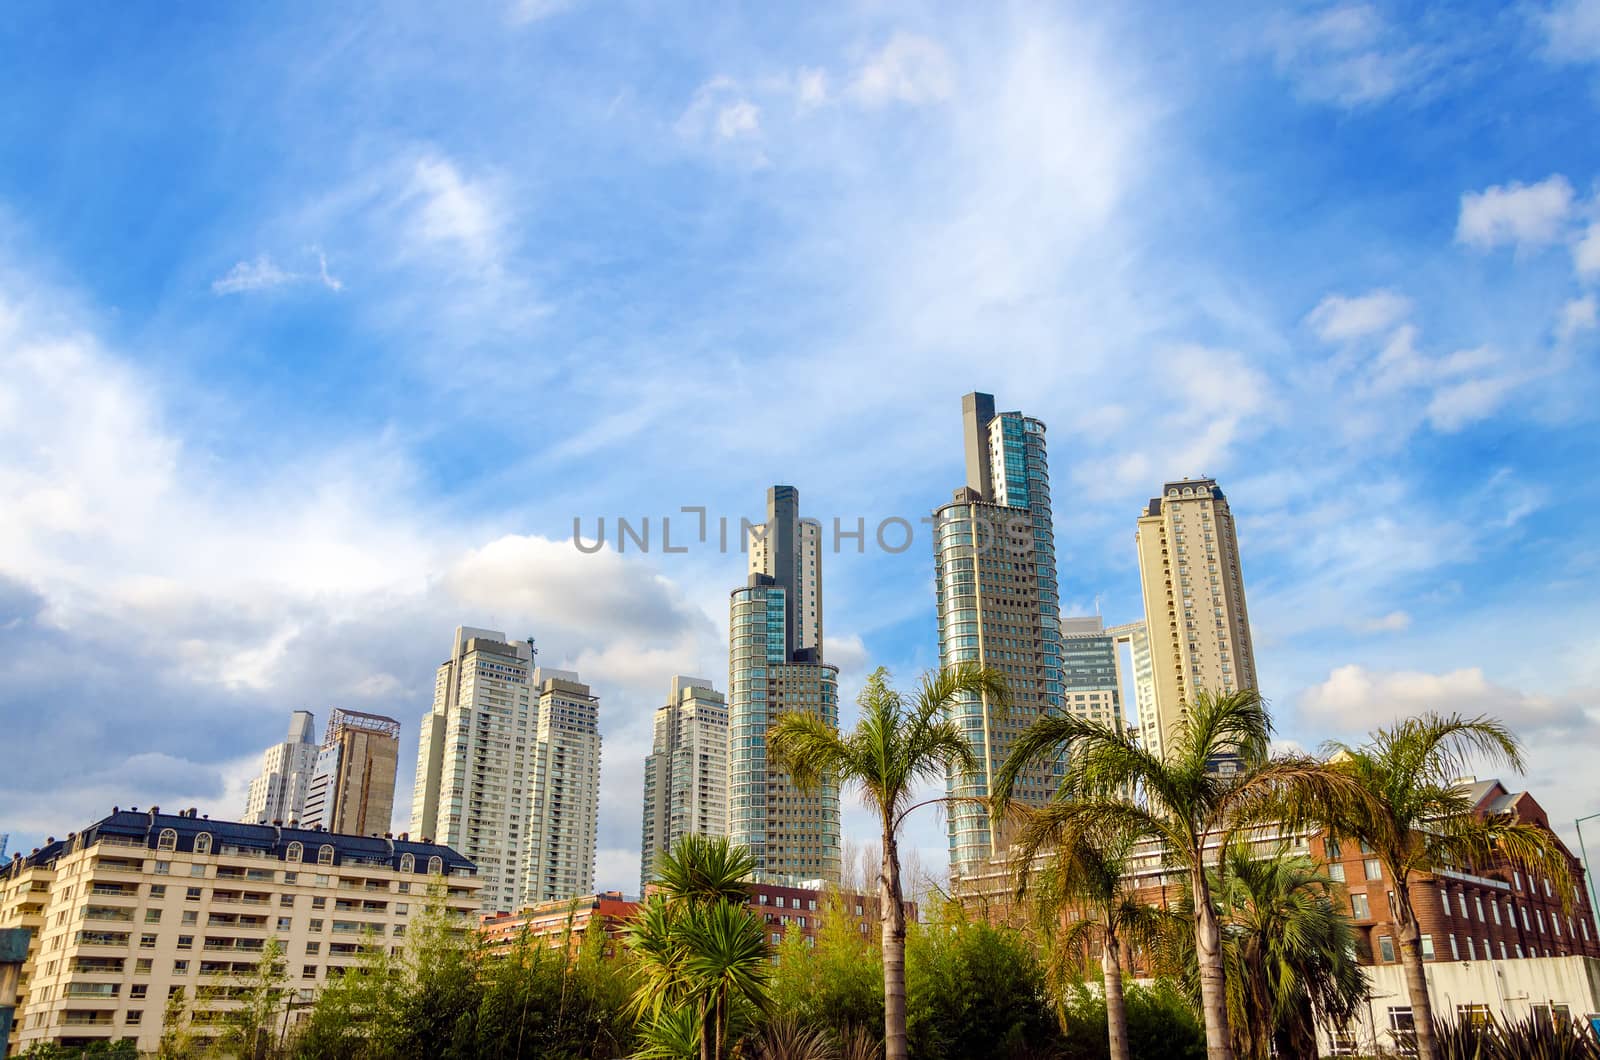 Skyscrapers of Puerto Madero in Buenos Aires, Argentina with palm trees in the foreground